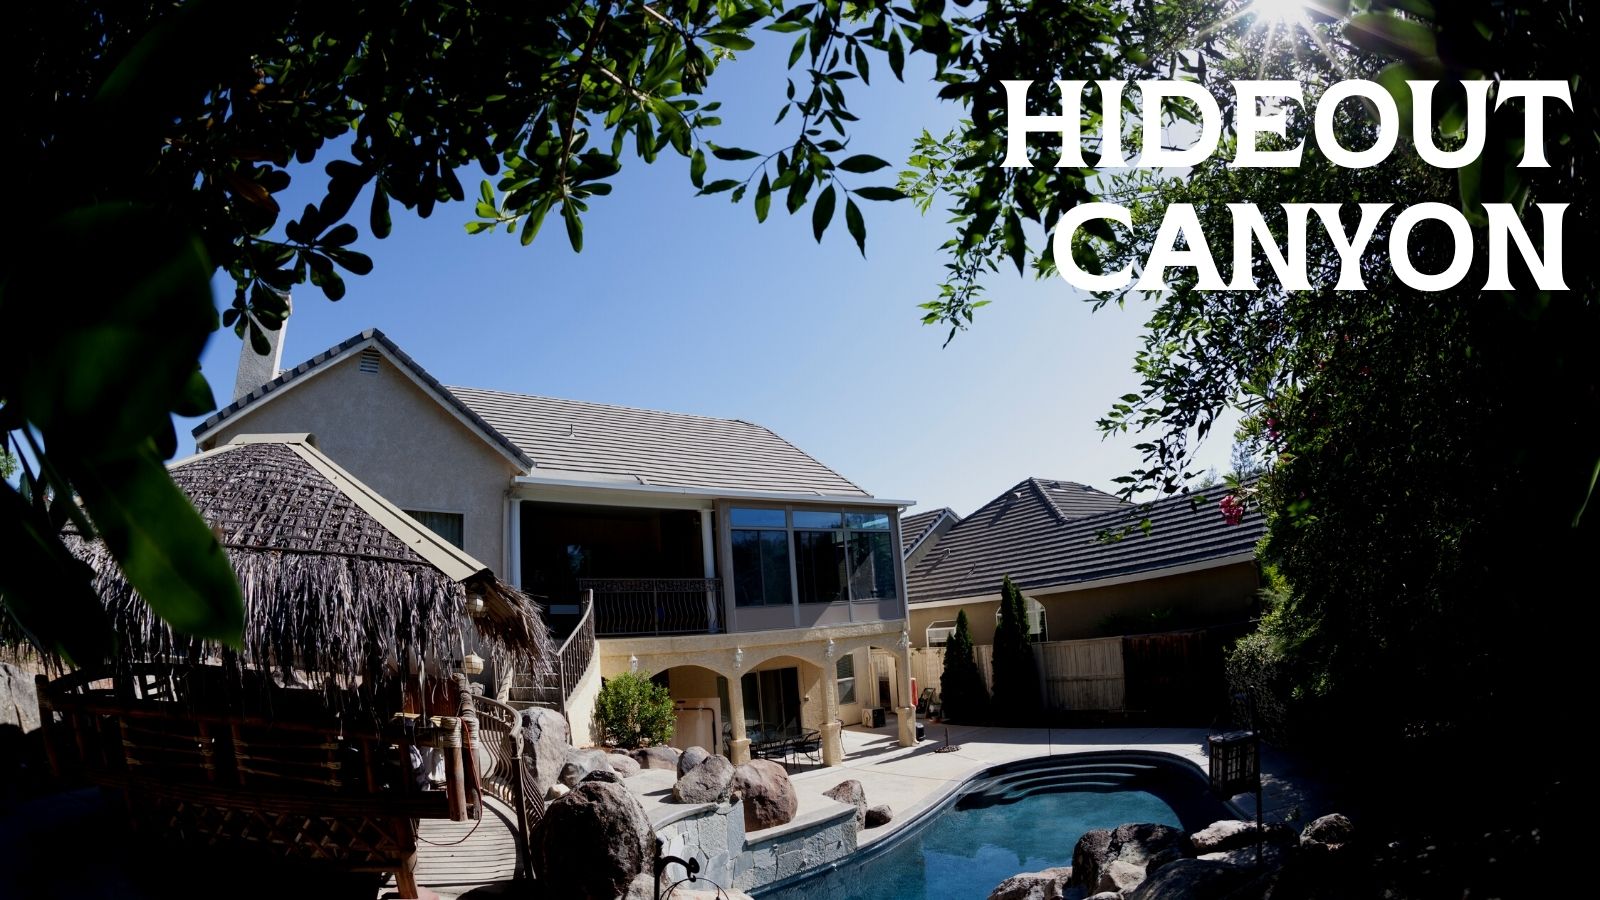 Hideout Canyon Homes for Sale